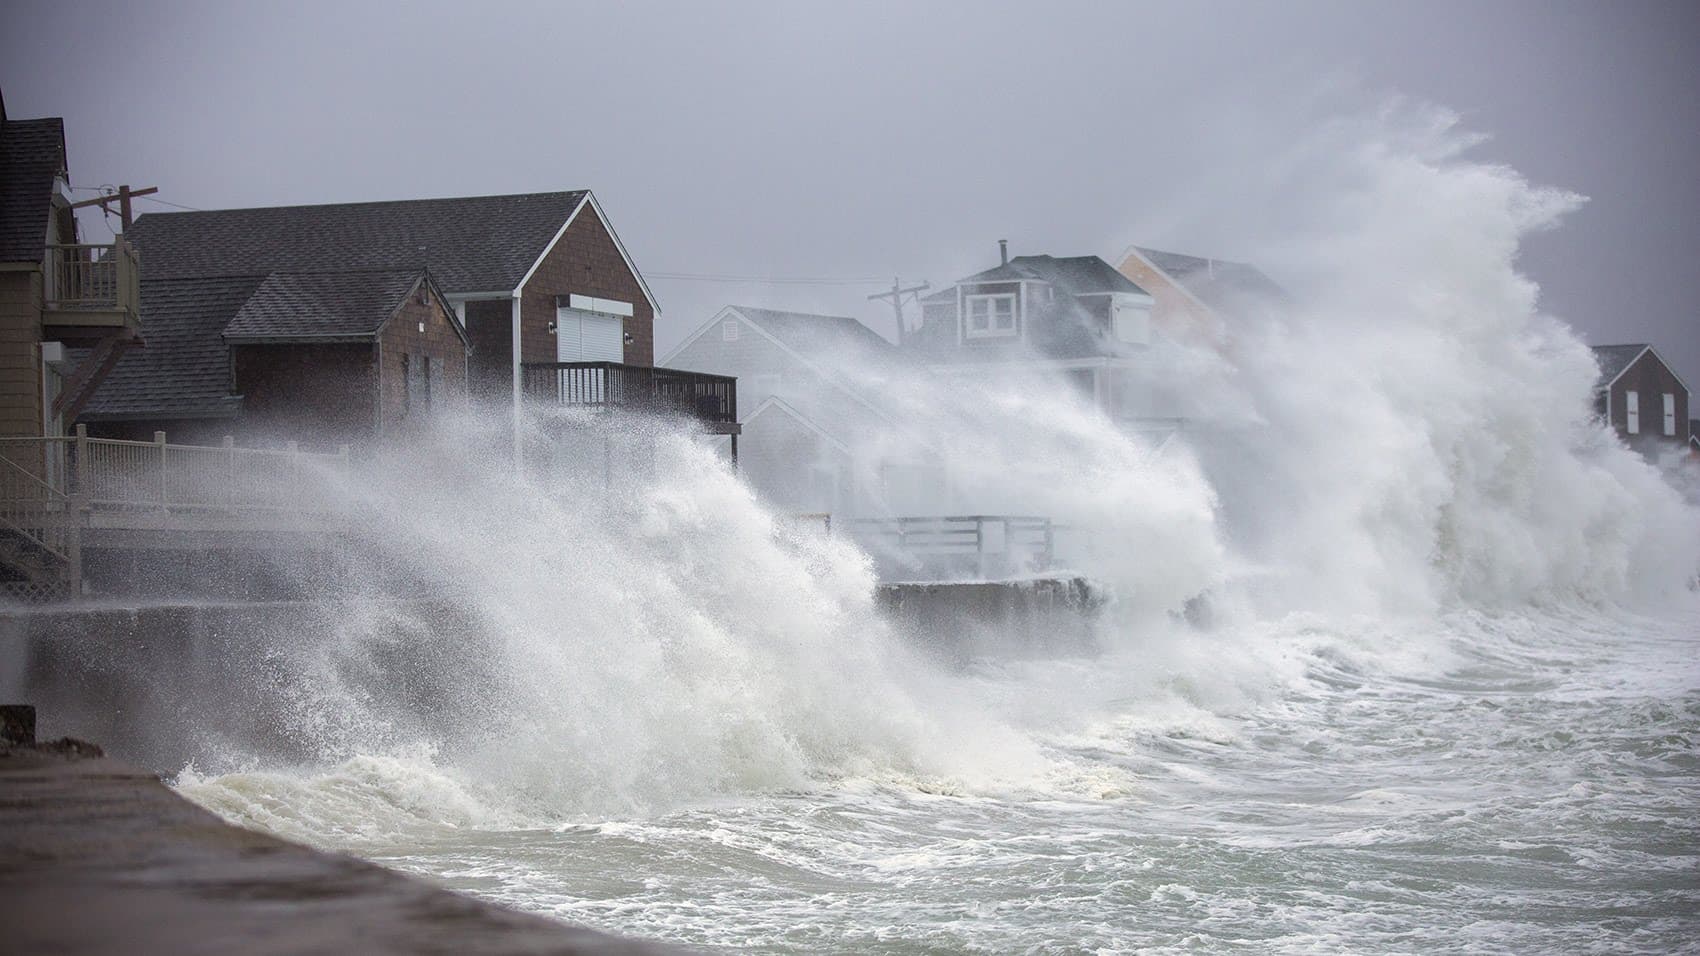 Houses along Lighthouse Road in Scituate are engulfed by waves crashing off the seawall on Friday. (Jesse Costa/WBUR)